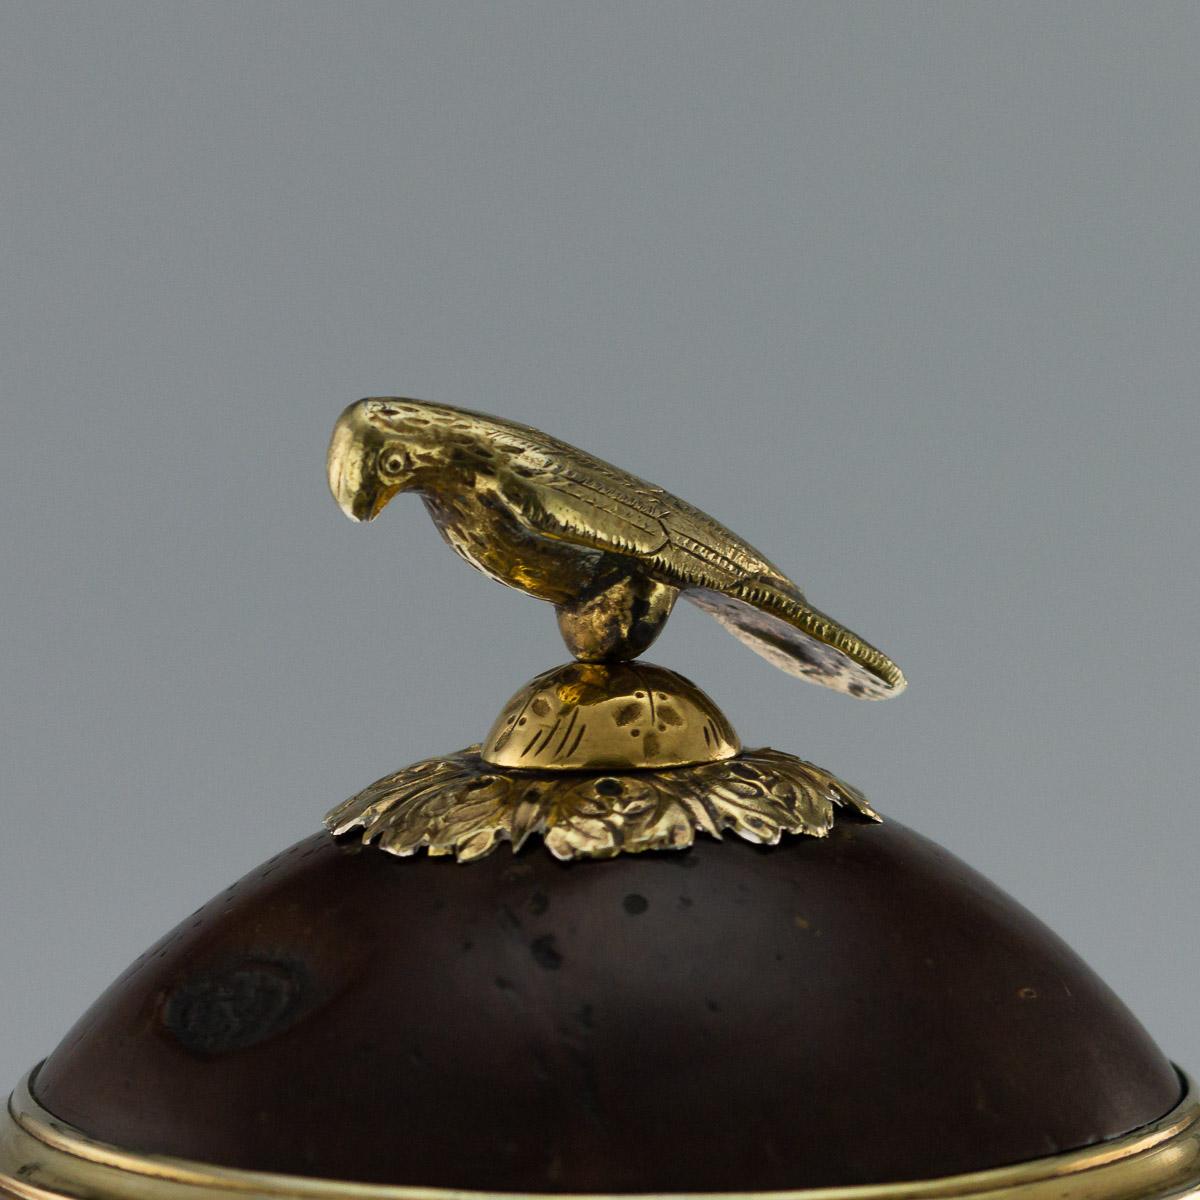 Antique Russian Silver-Gilt Mounted Coconut Lidded Cup, Tula, circa 1825 3